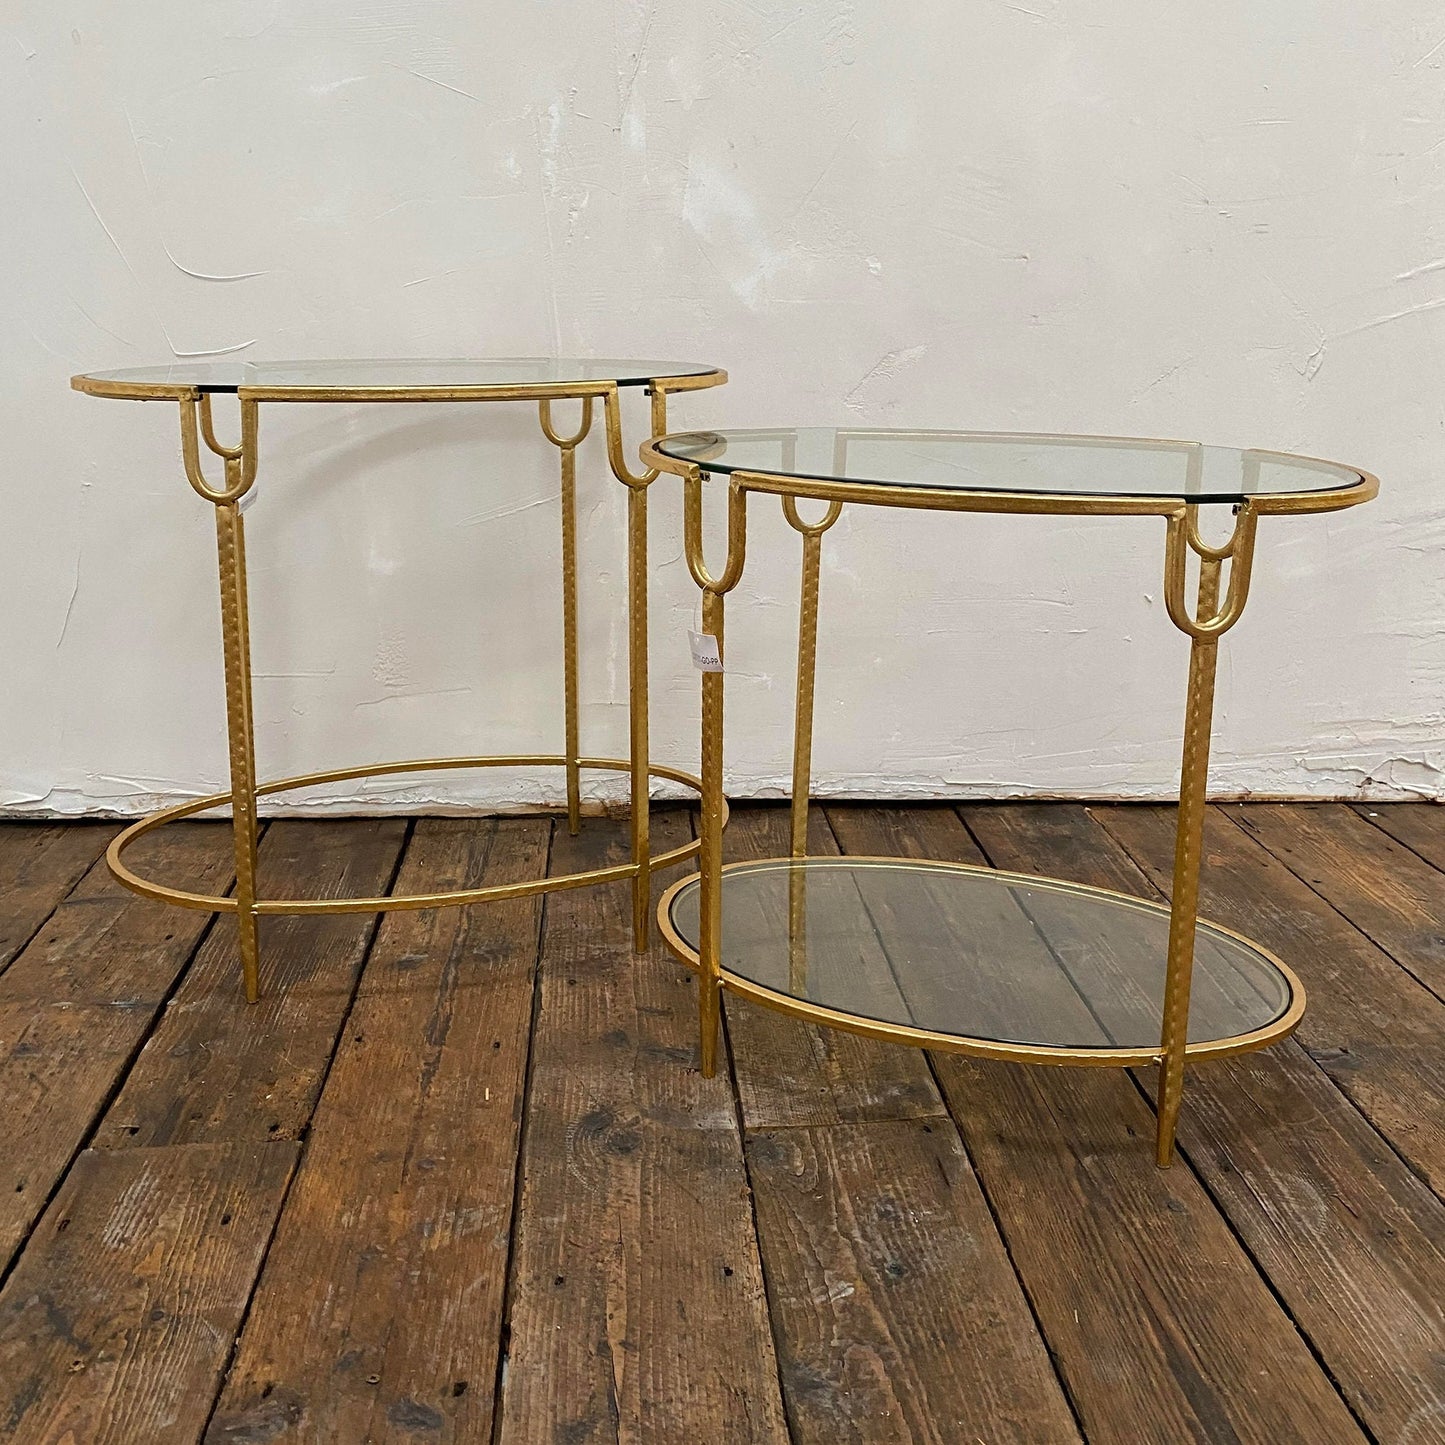 Beautiful nest of tables in gold gilt leaf - oval shape